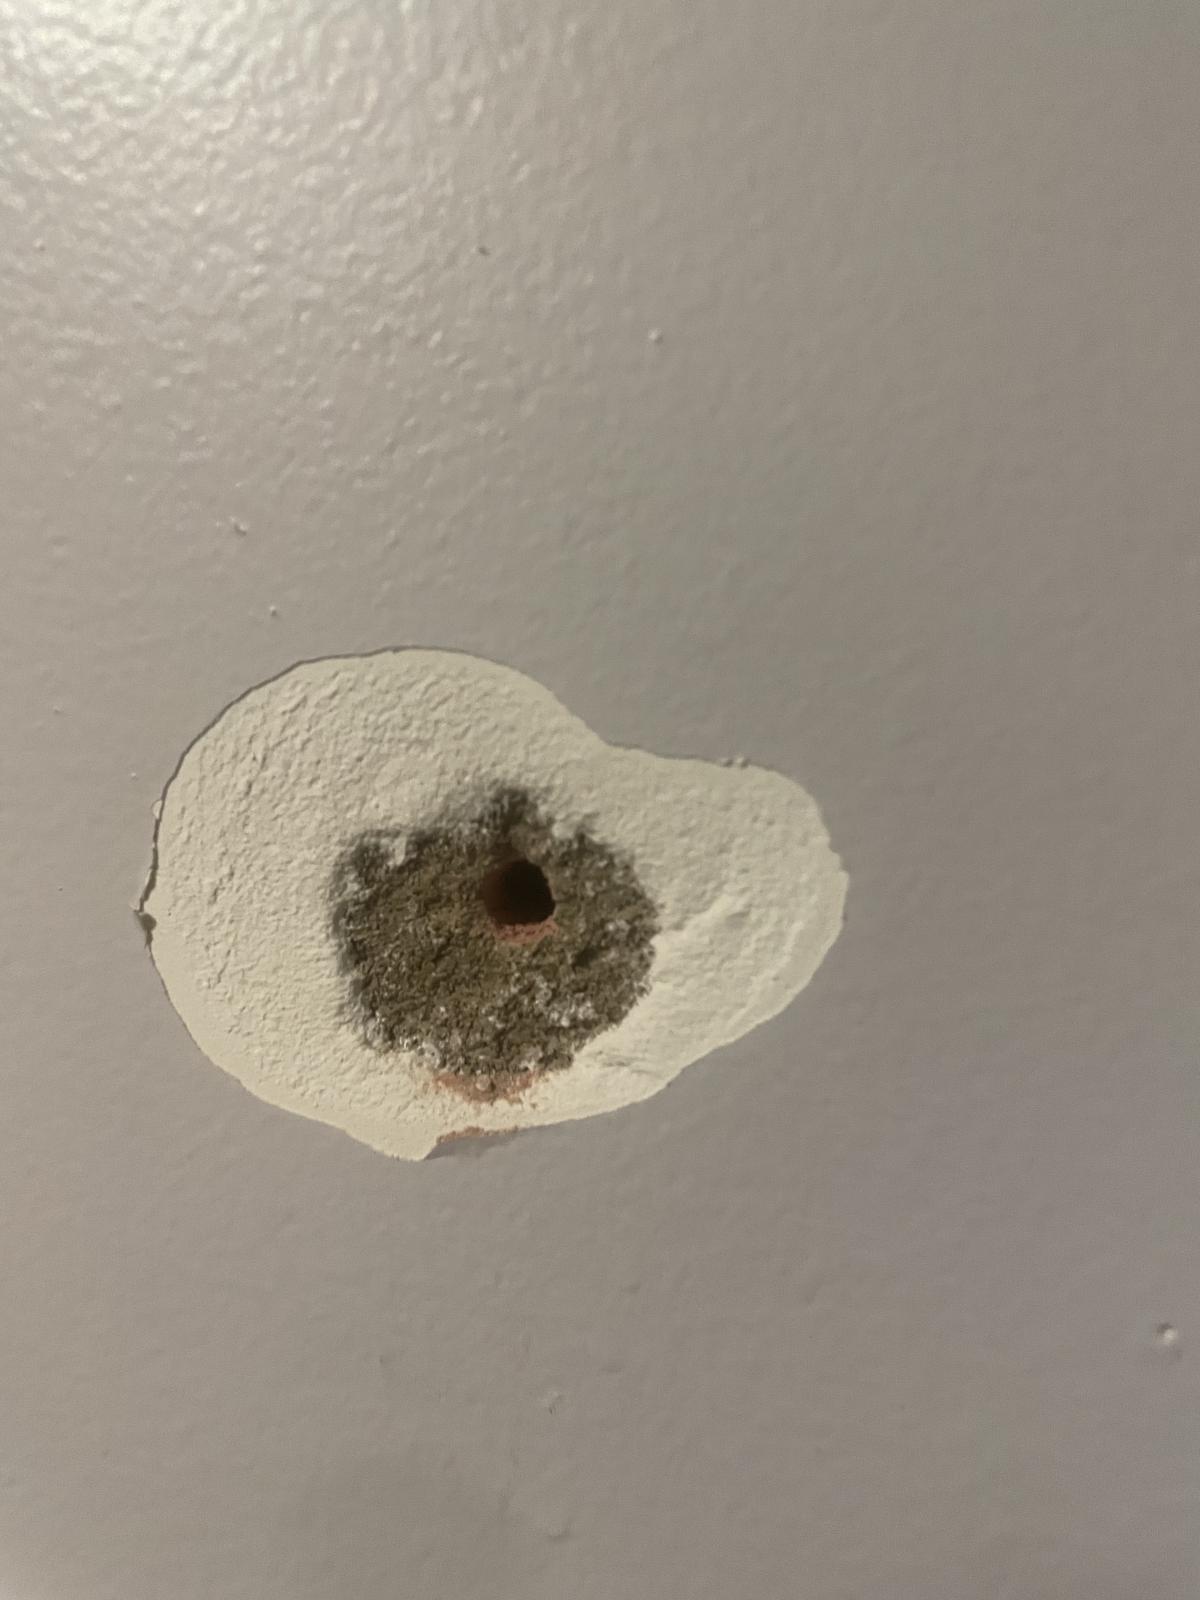 Wall plaster/rendering question